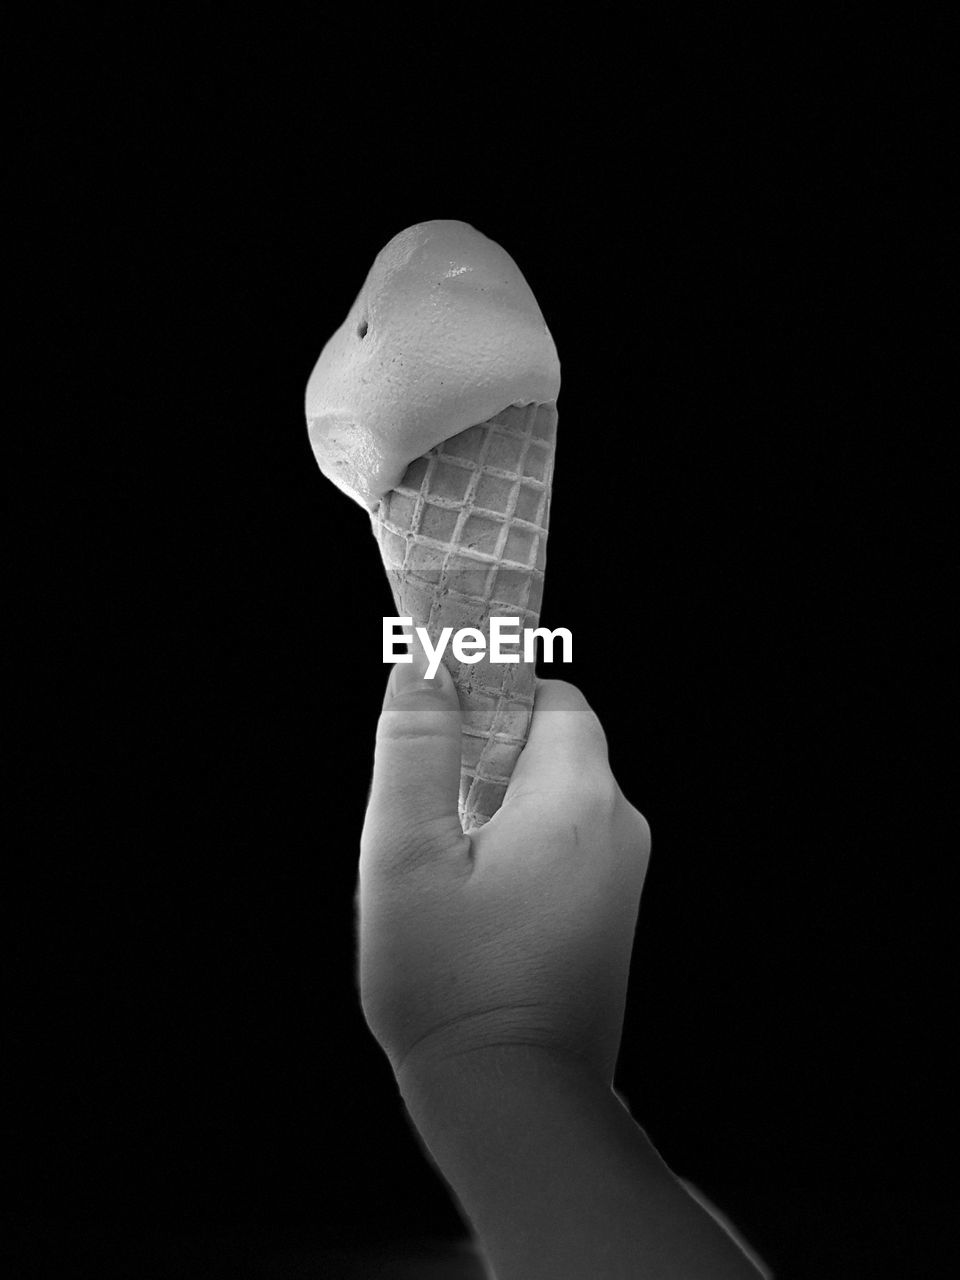 CLOSE-UP OF PERSON HOLDING ICE CREAM AGAINST BLACK BACKGROUND